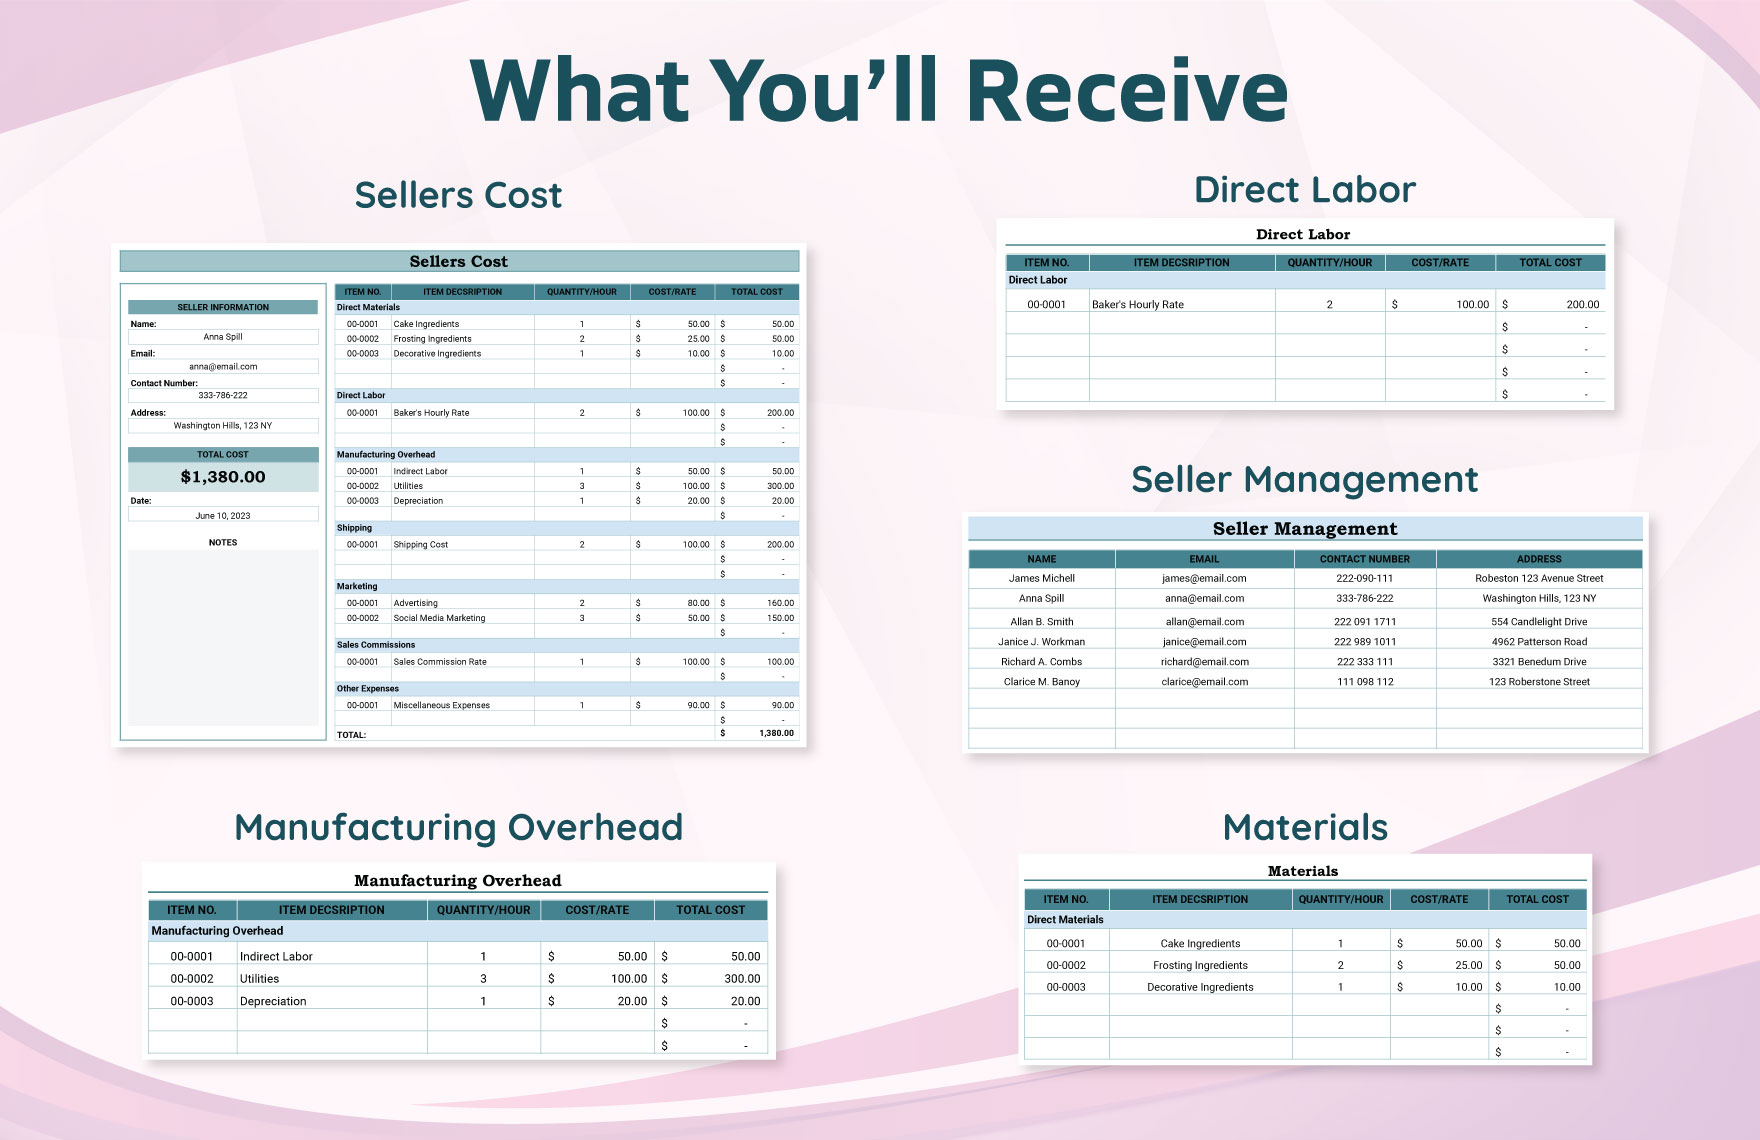 Sellers Cost Template